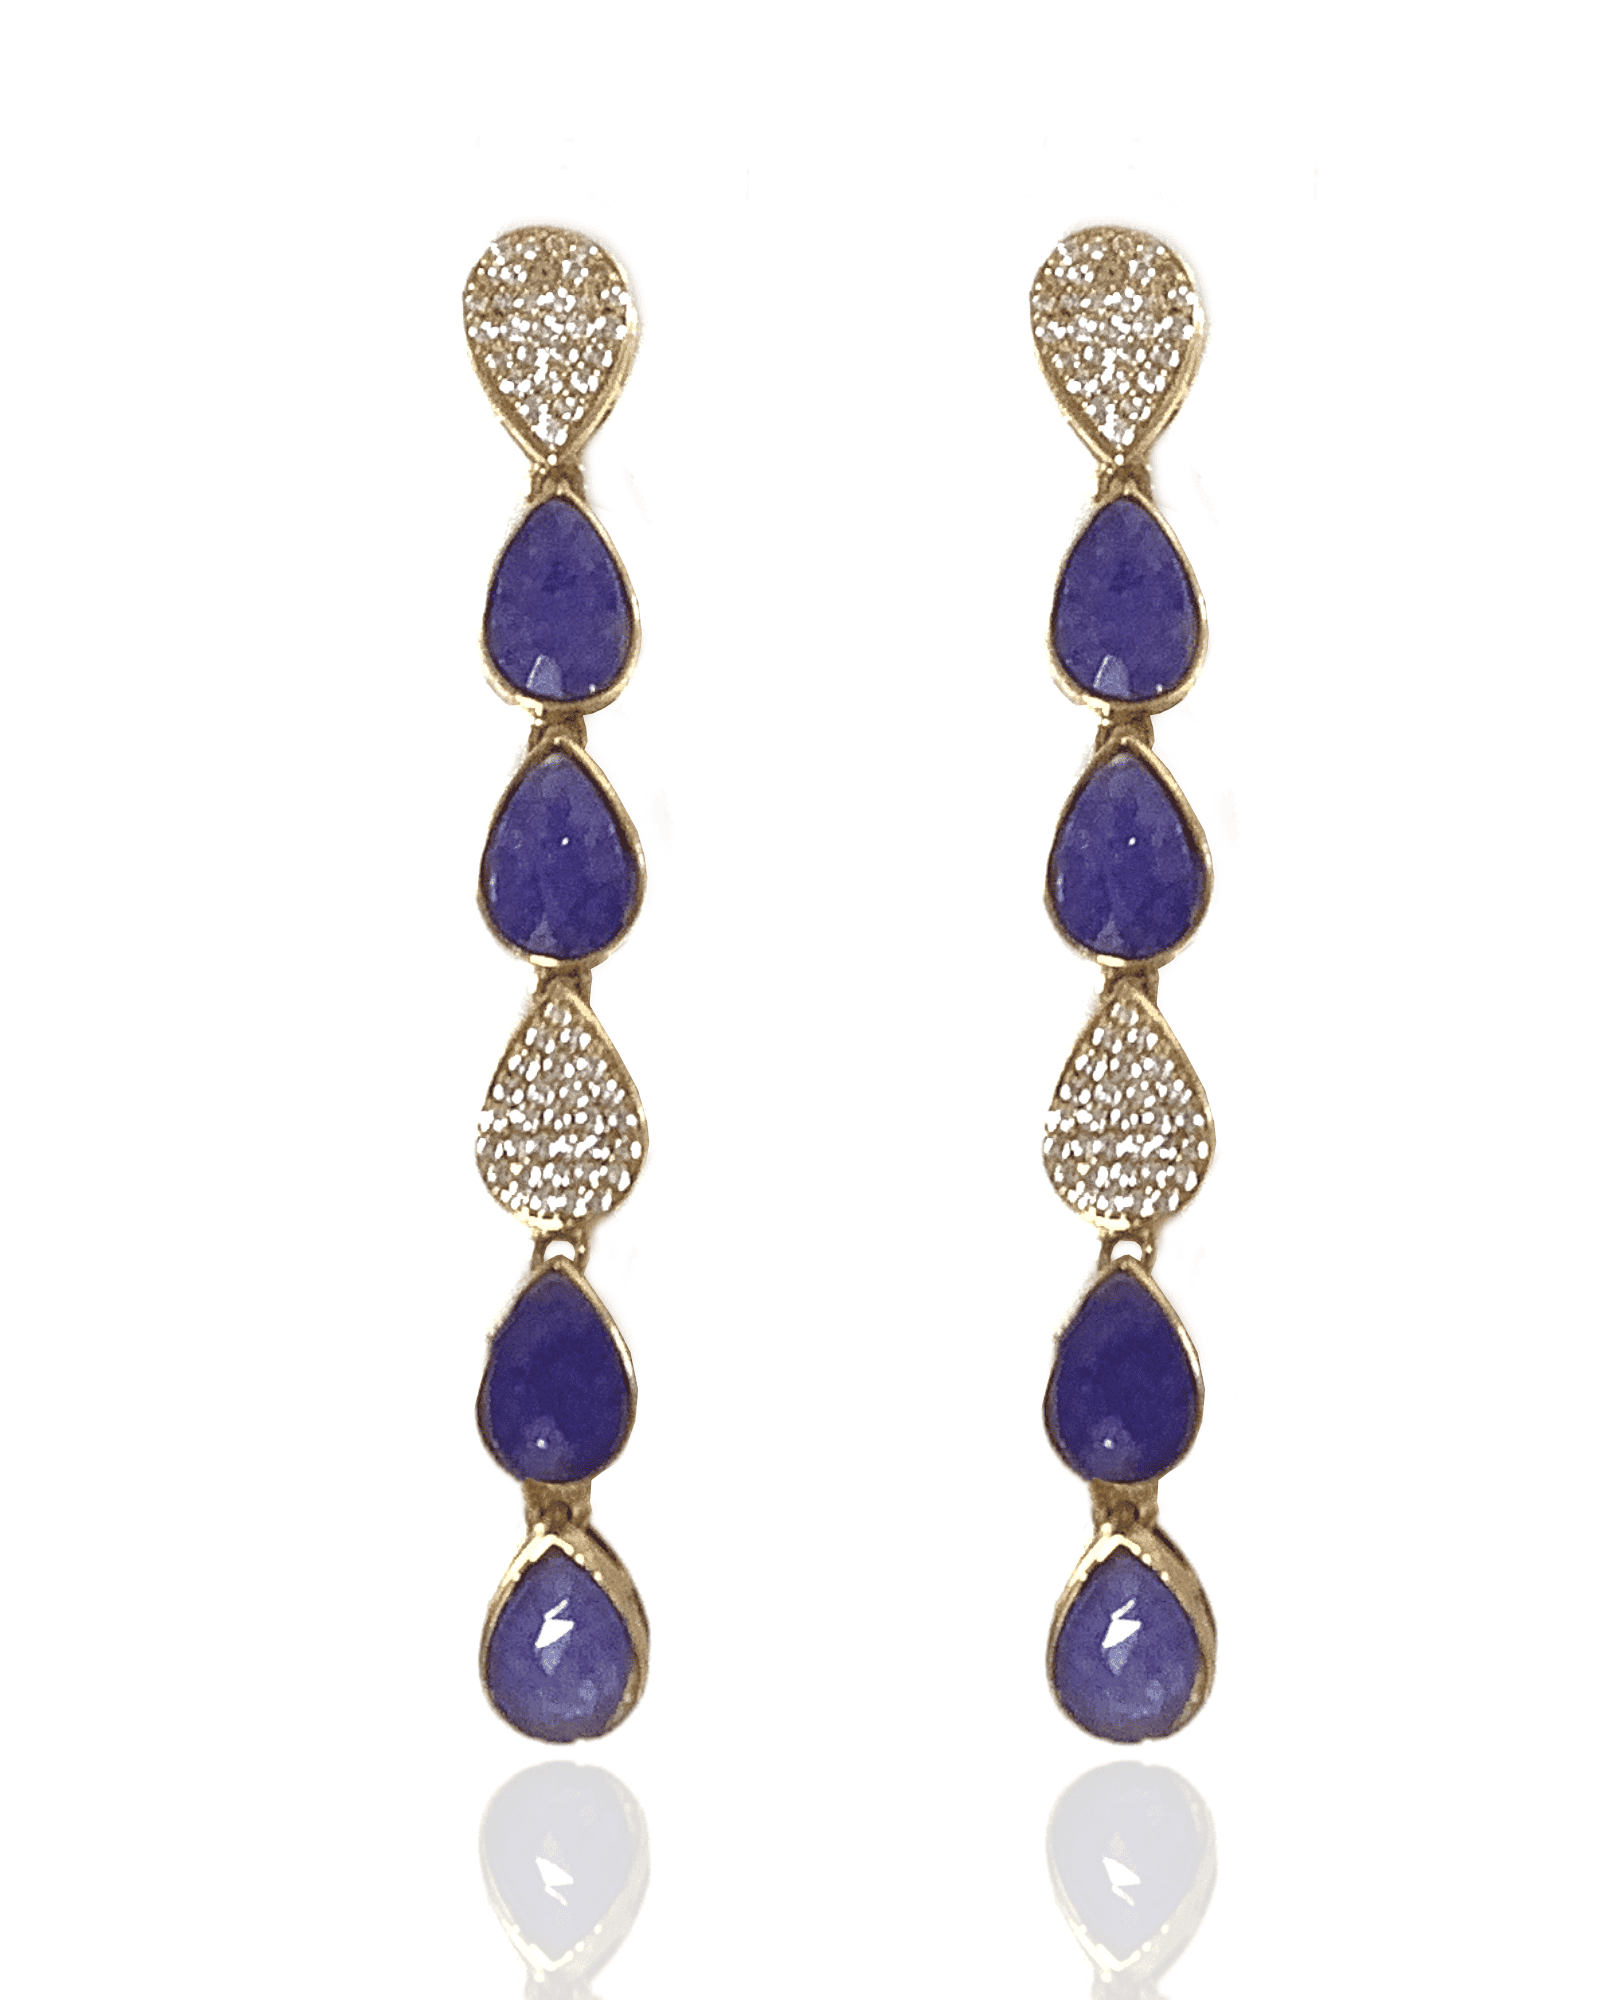 Blue Lapis and Paved CZ Alluring ADMK Earrings | ADMK, Inc.